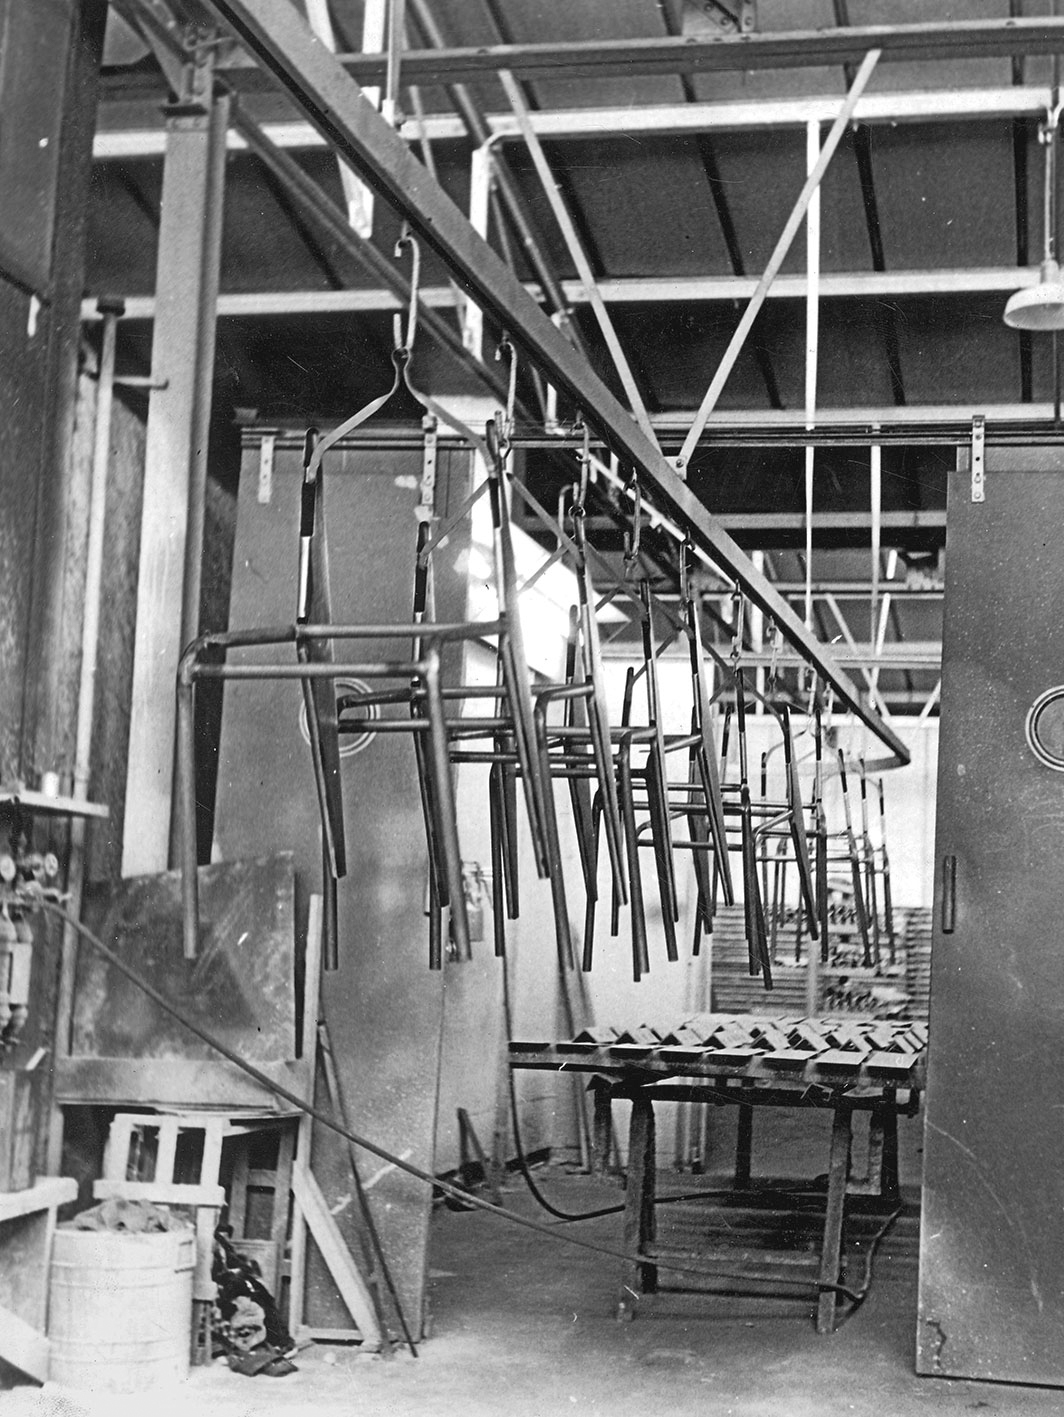 Structures of the Métropole no. 305 chair prepared to be painted, c. 1952.